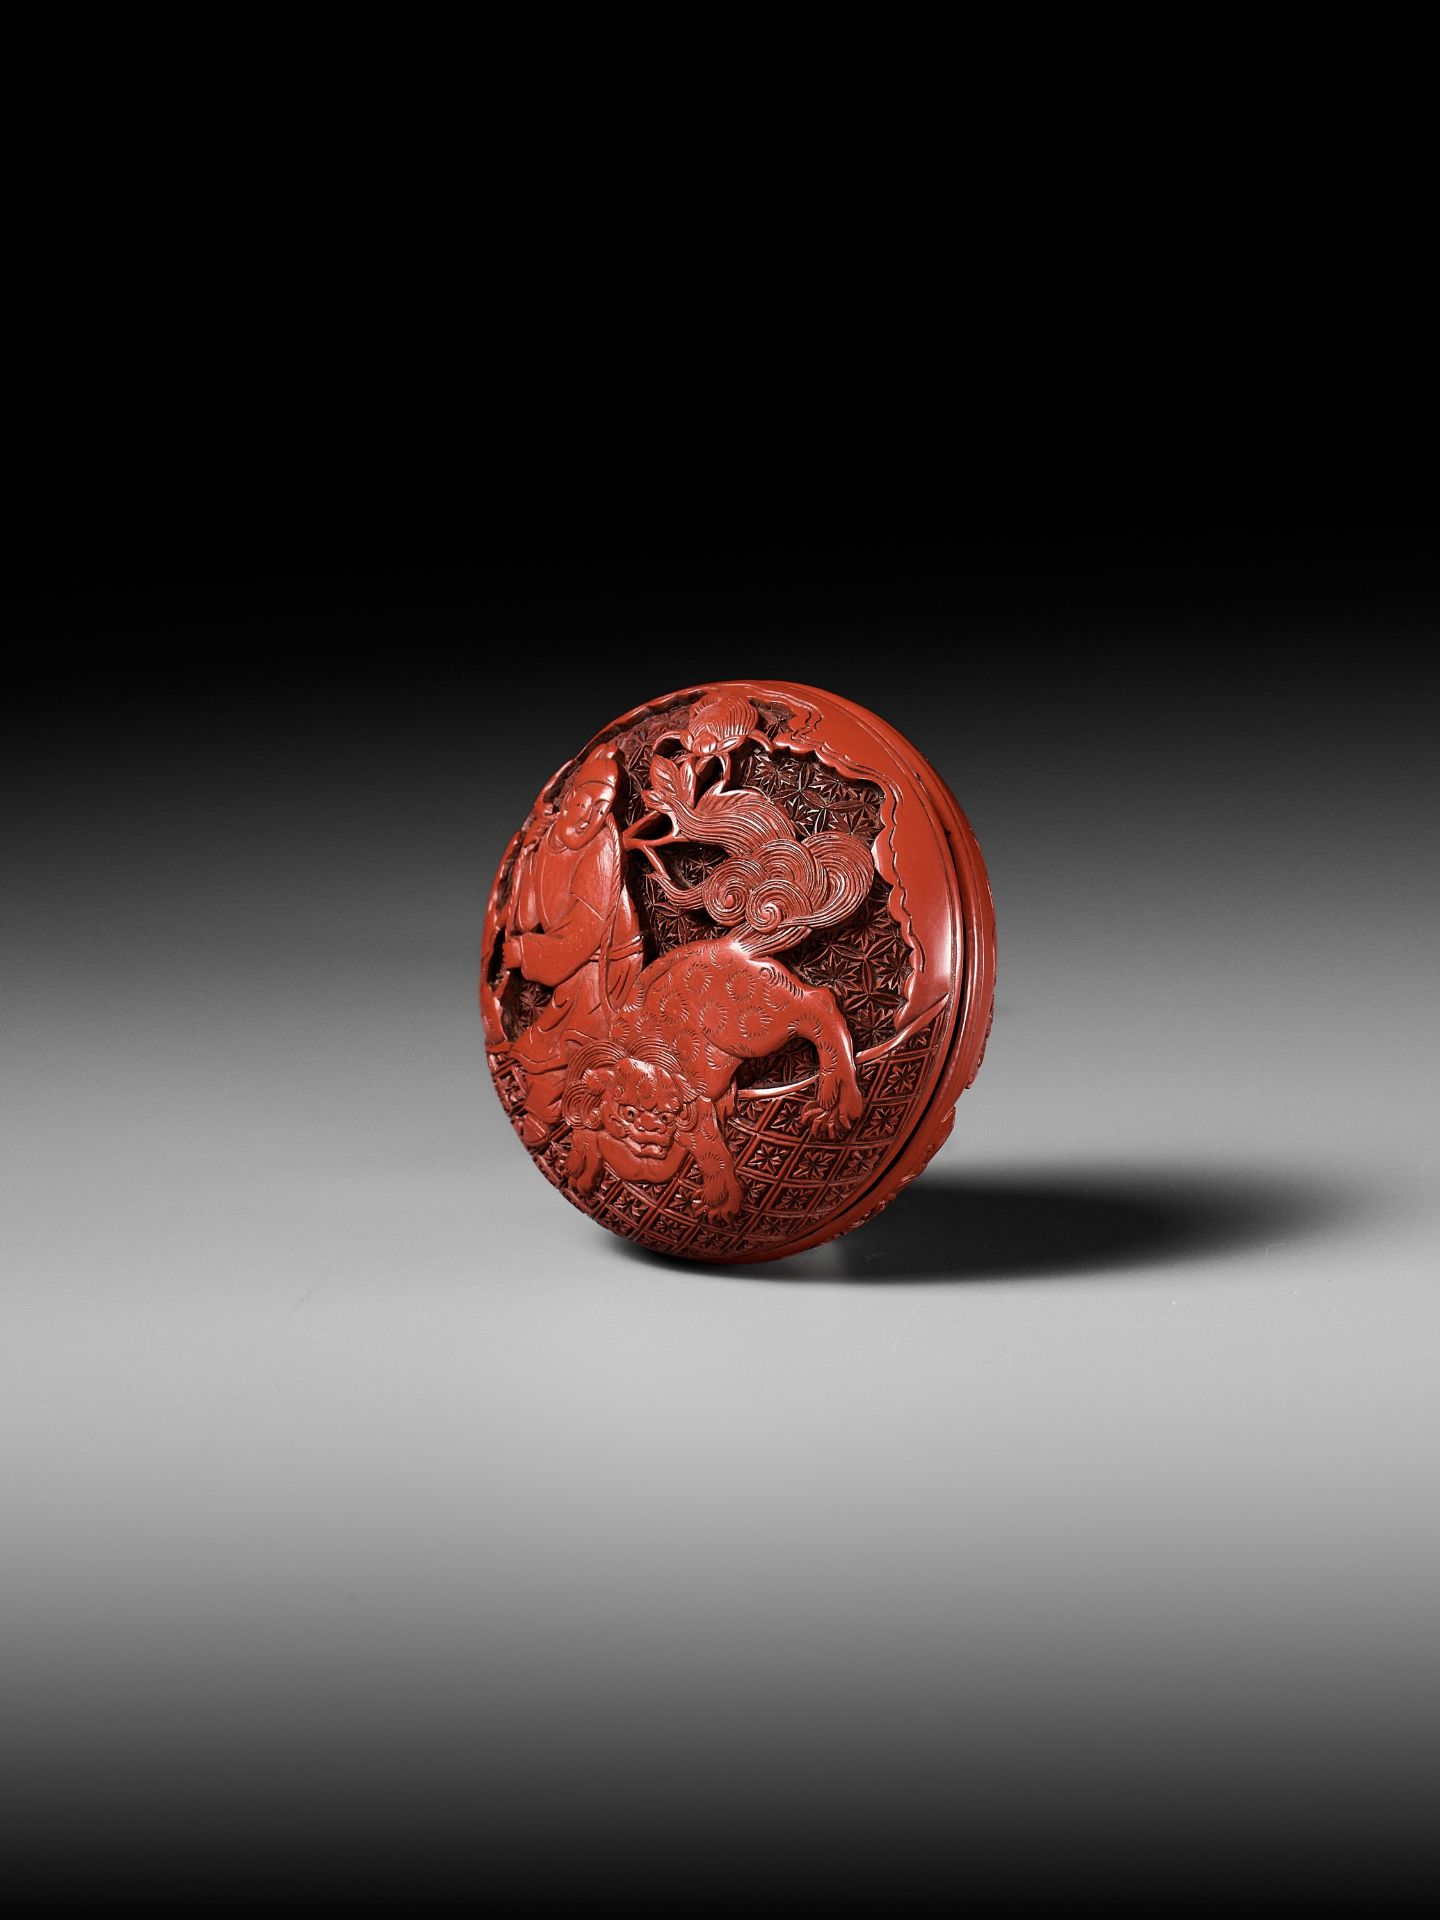 A FINE TSUISHU (CARVED RED LACQUER) MANJU NETSUKE WITH CHINESE LITERATI AND SHISHI - Image 2 of 9